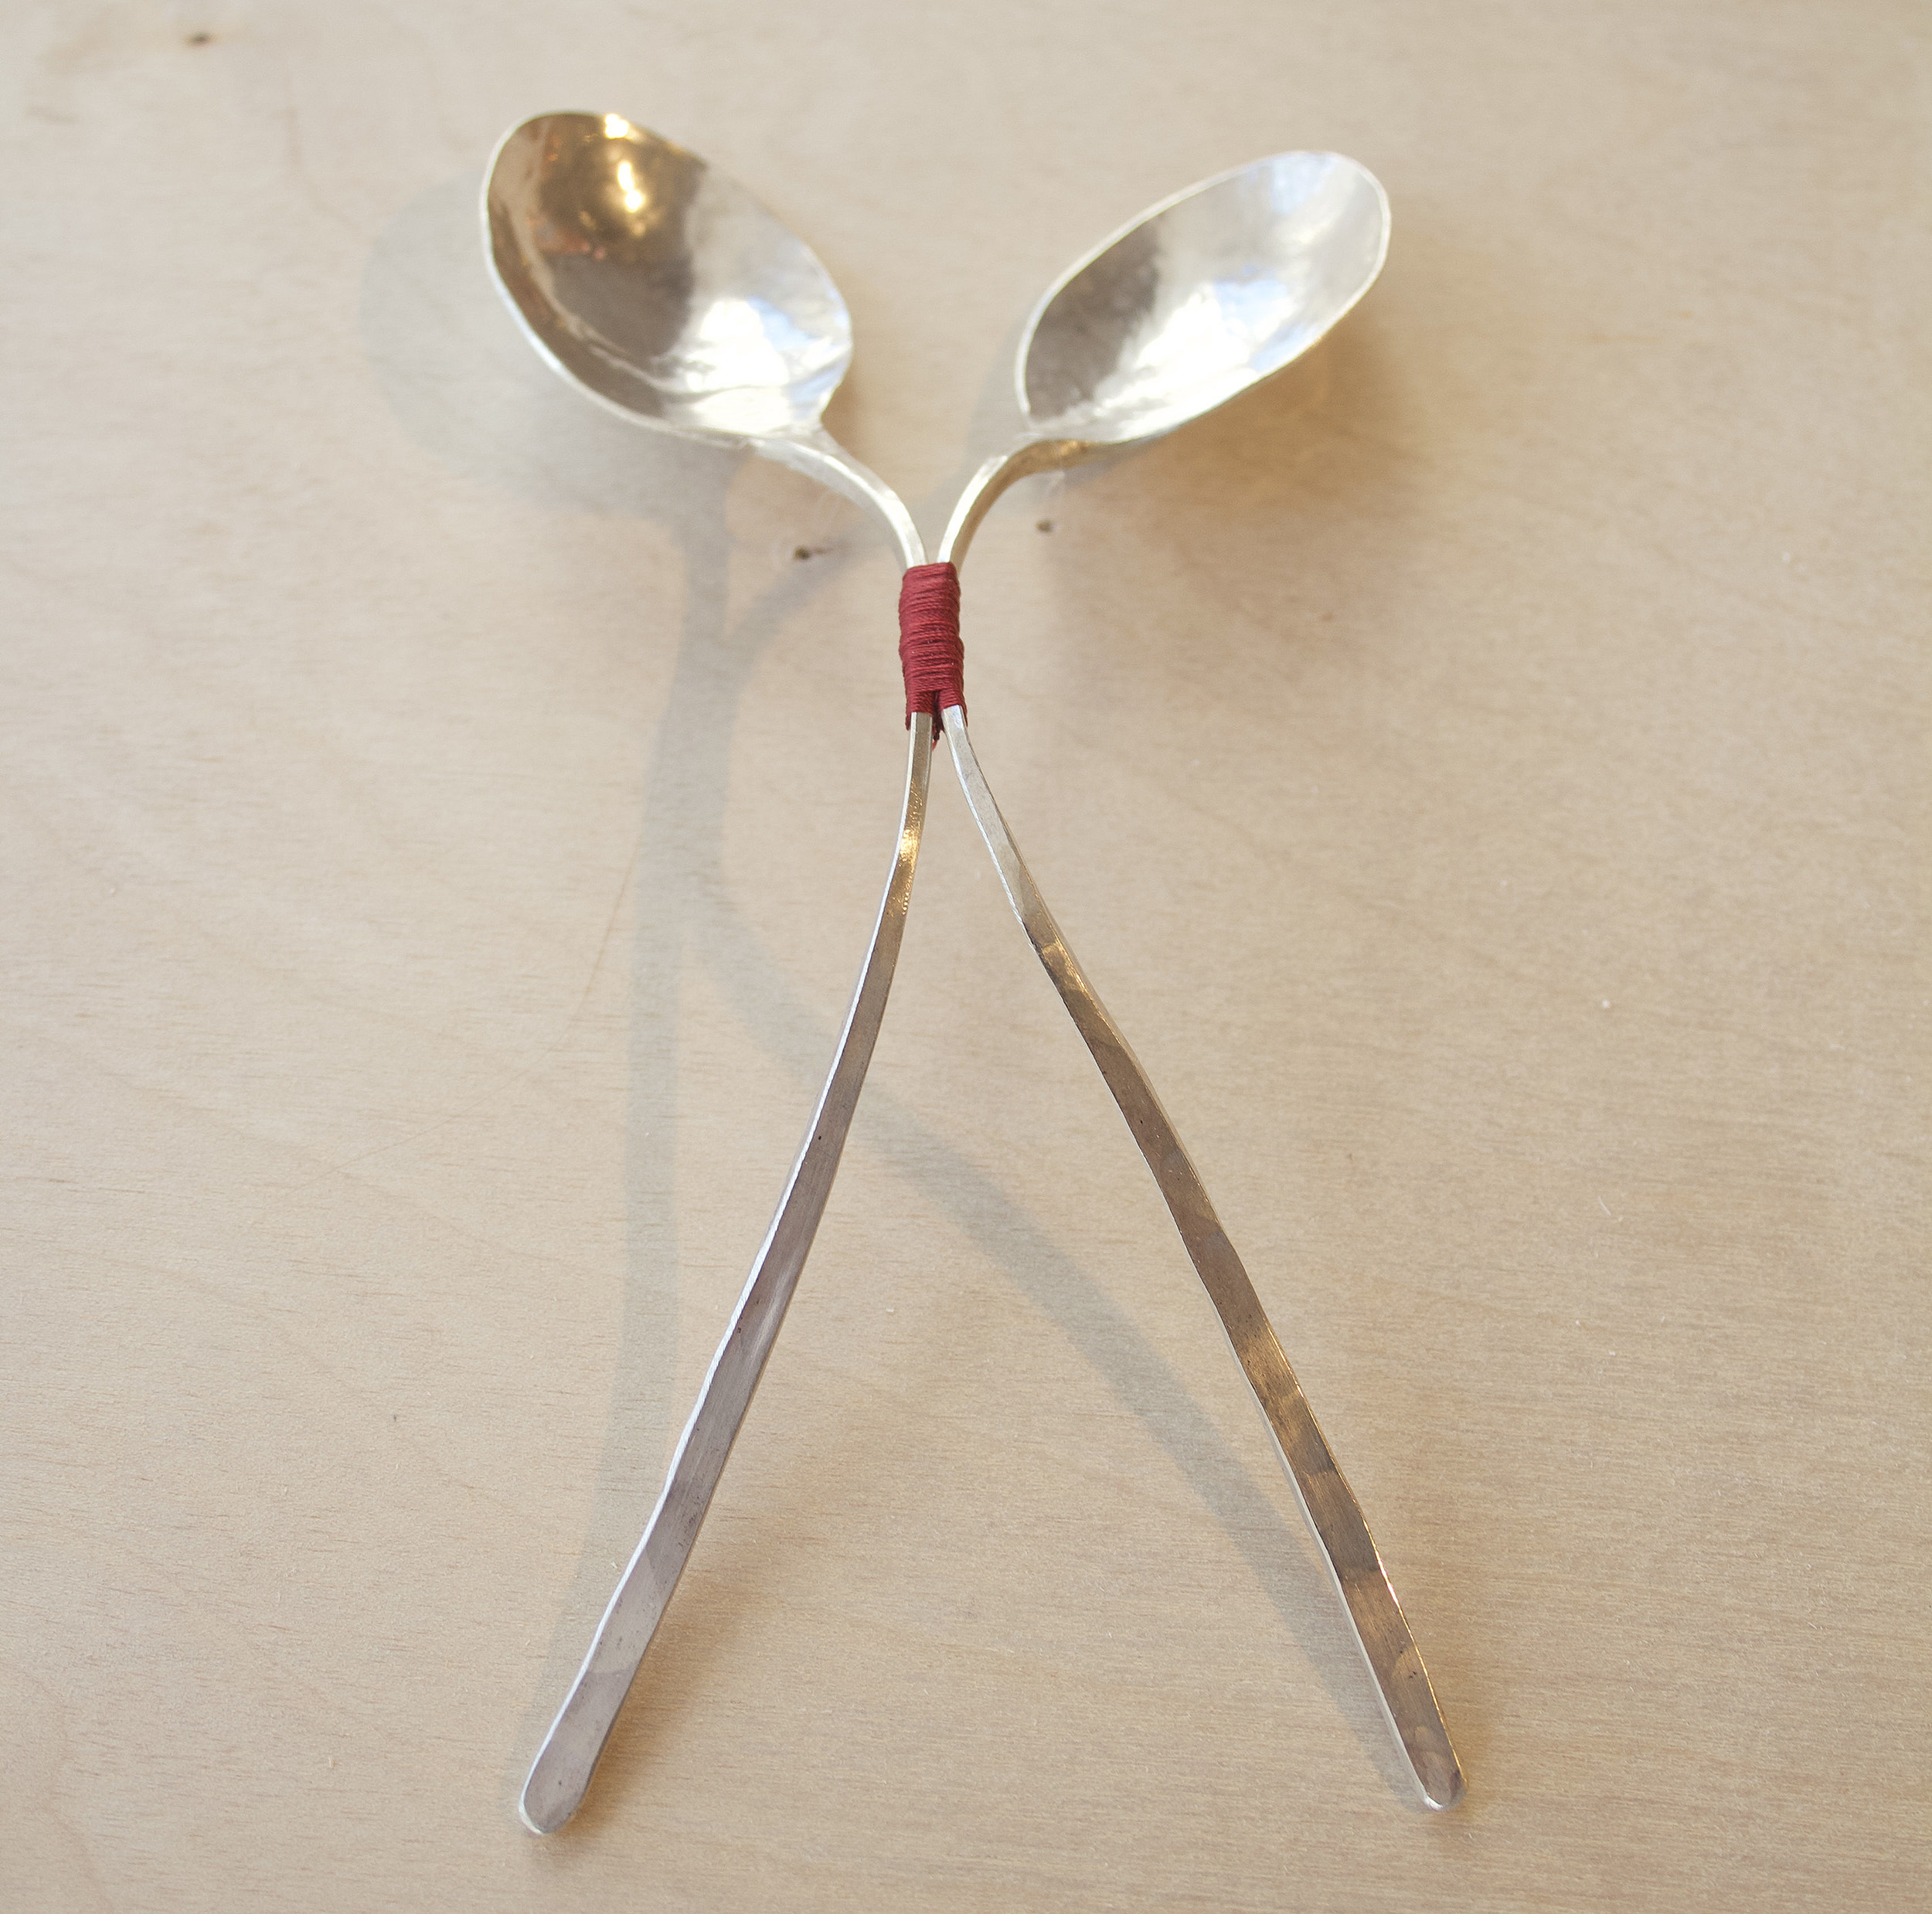 a pair of spoons connected